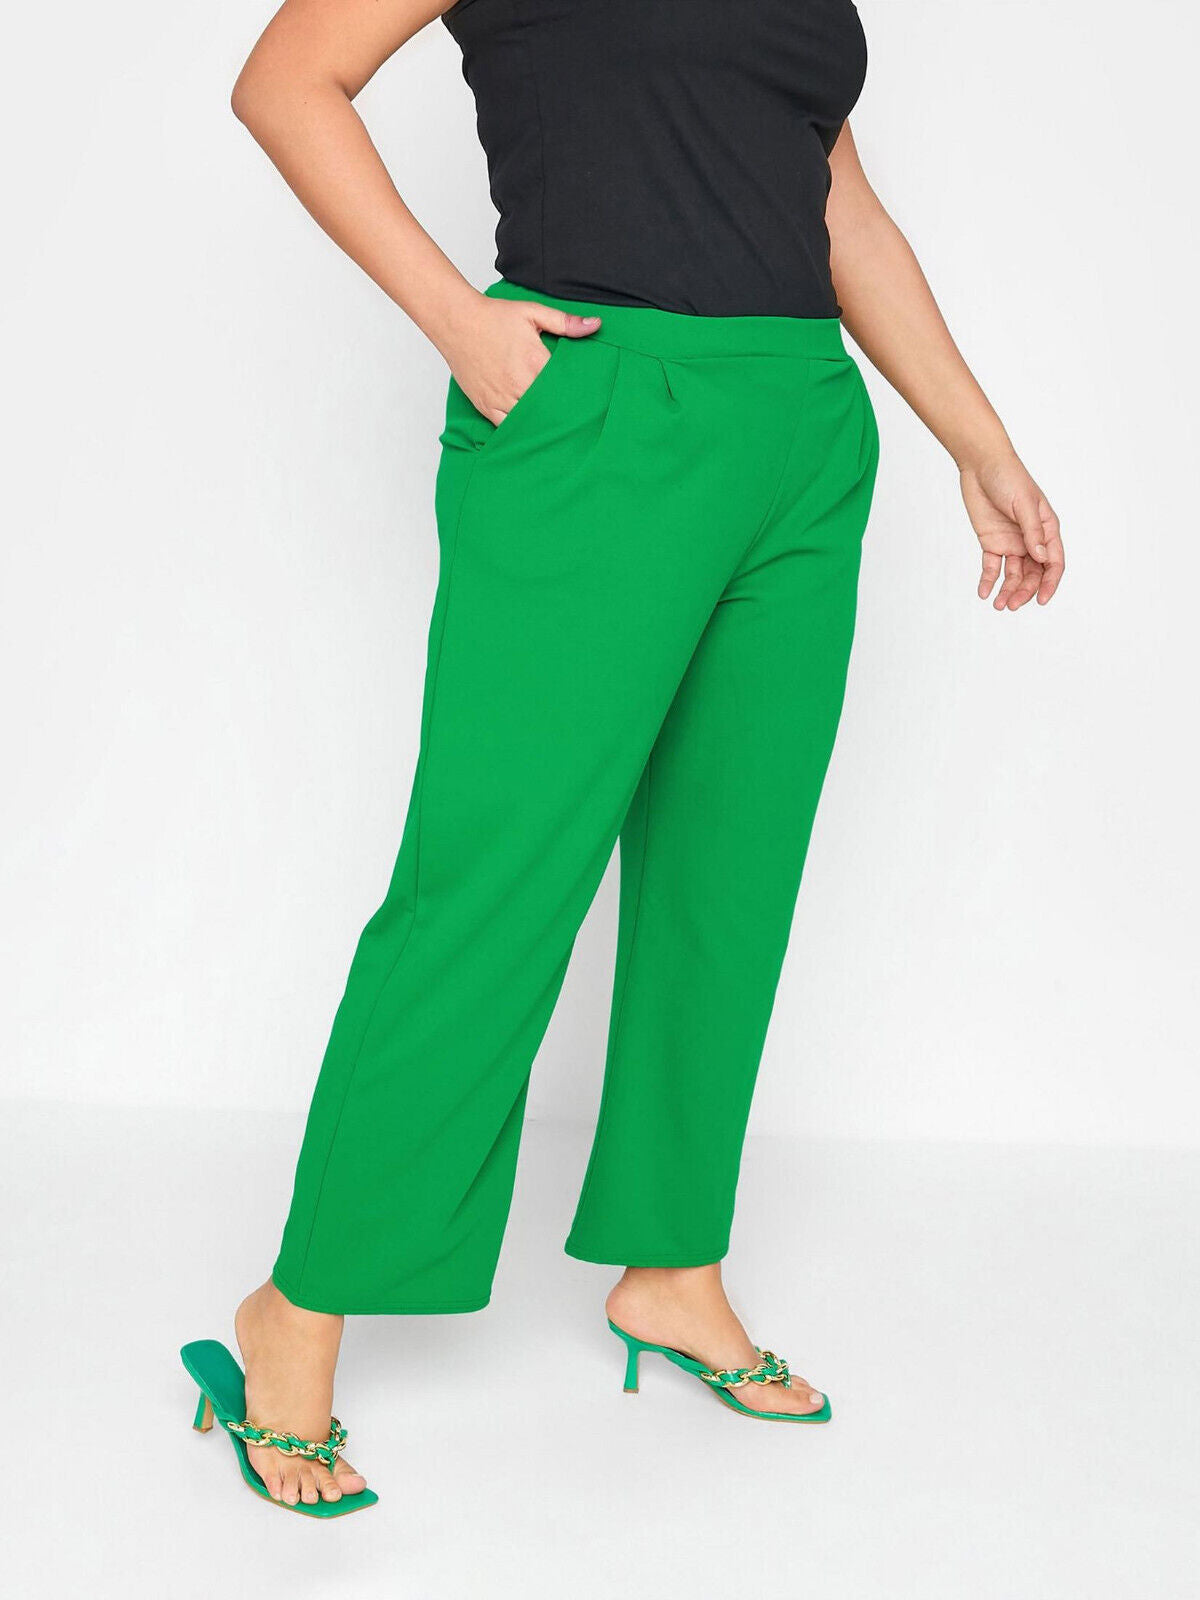 Yours Wide Leg Jade Green Trouser Size 26 **** V30T